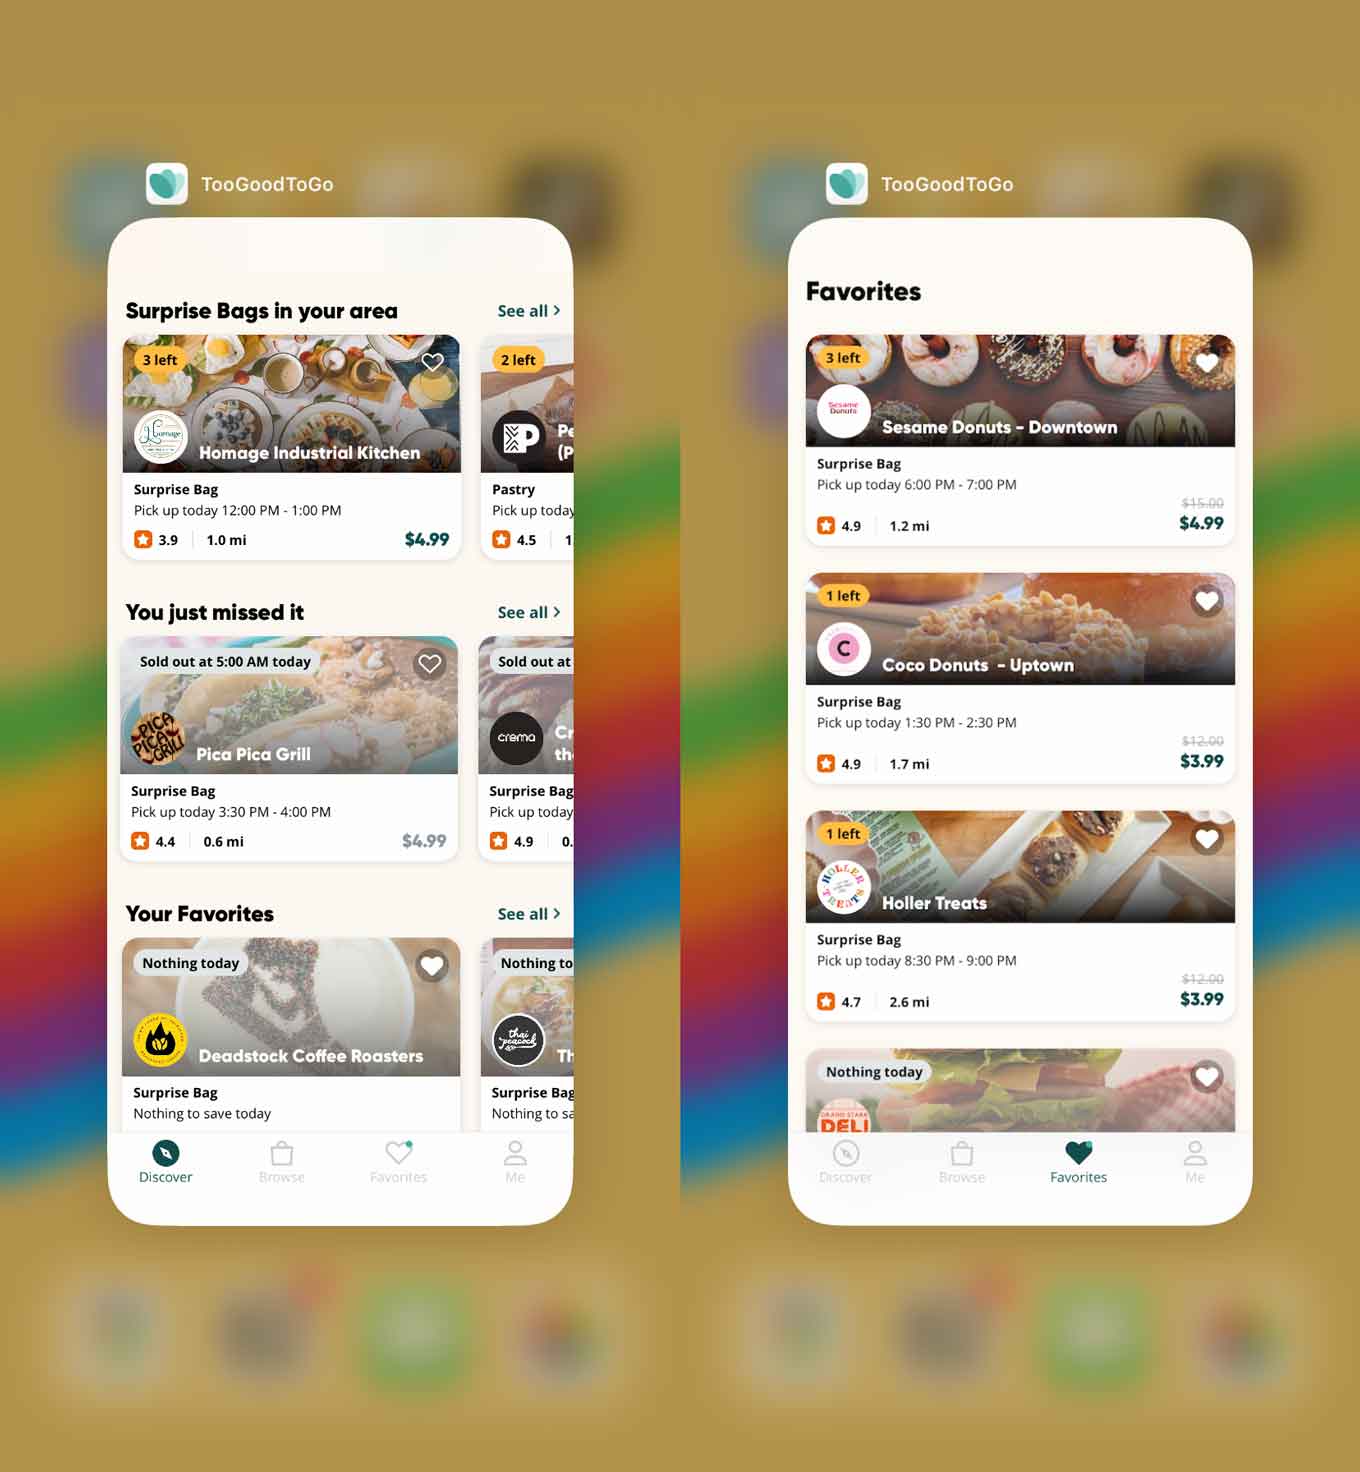 Screenshots of the Too Good To Go app on iPhone, showing available Surprise Bags